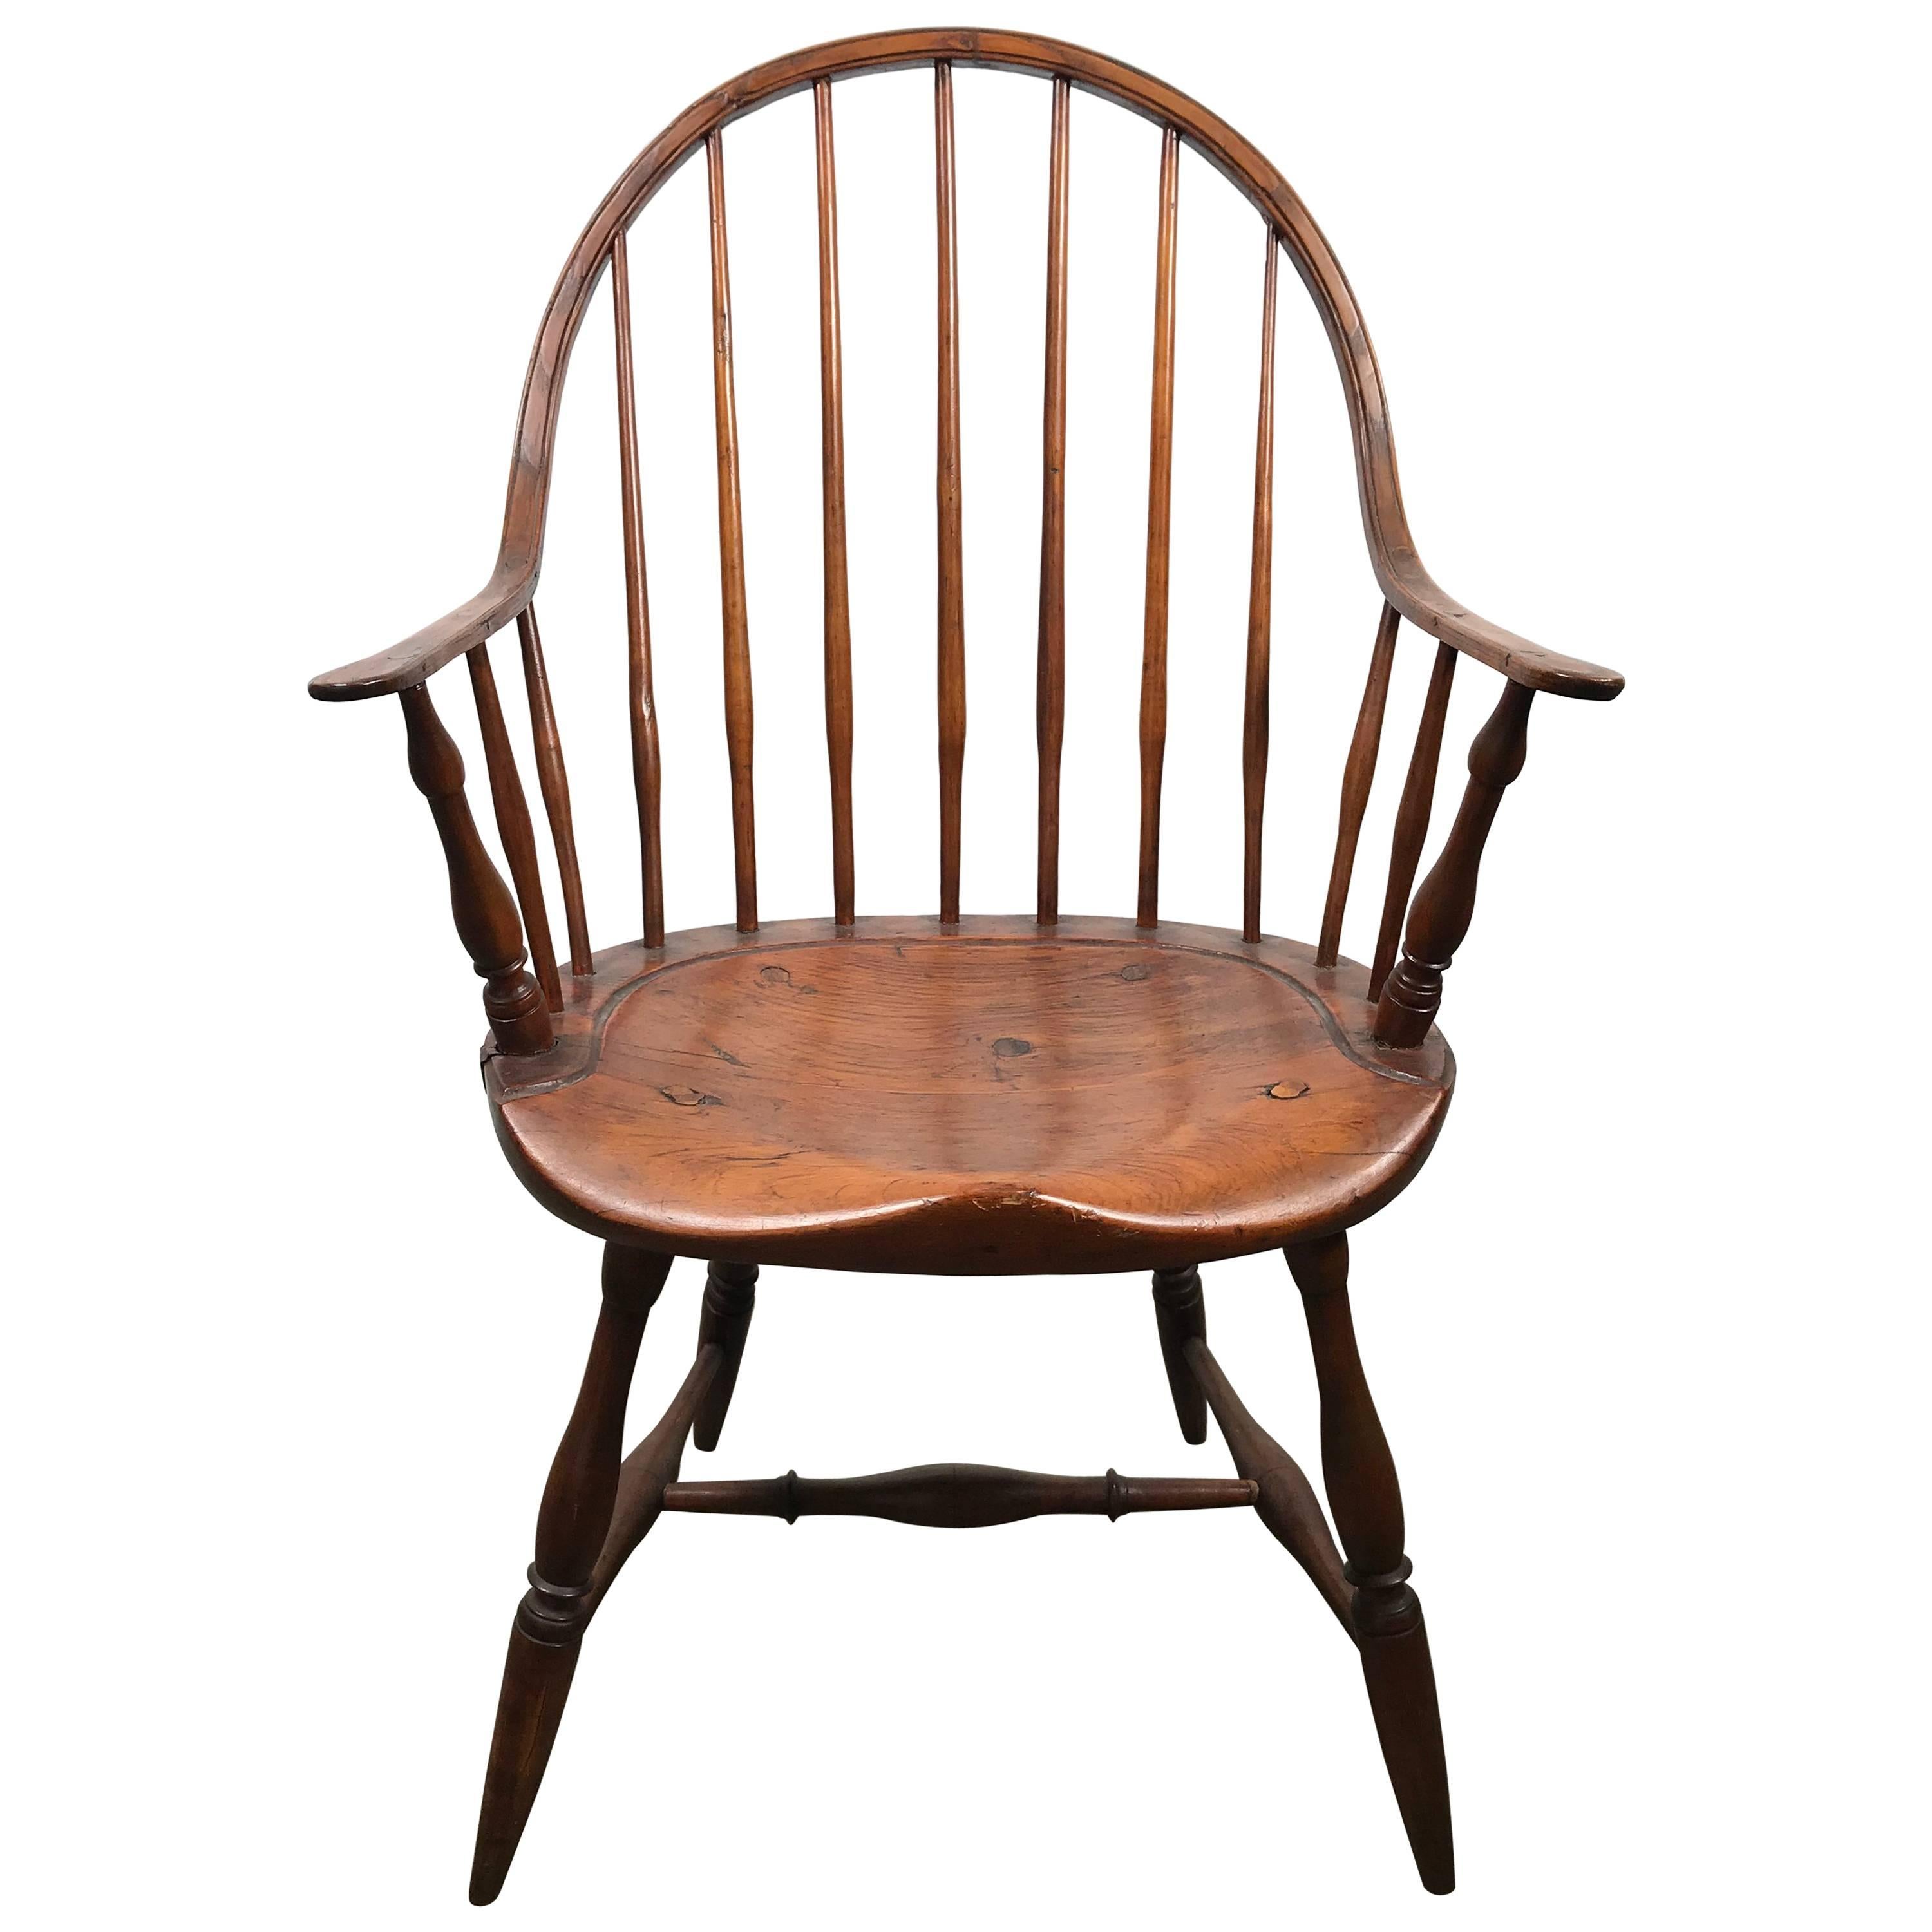 Early Continuous Windsor Chair Attributed to Ebenezer Lacy, circa 1780